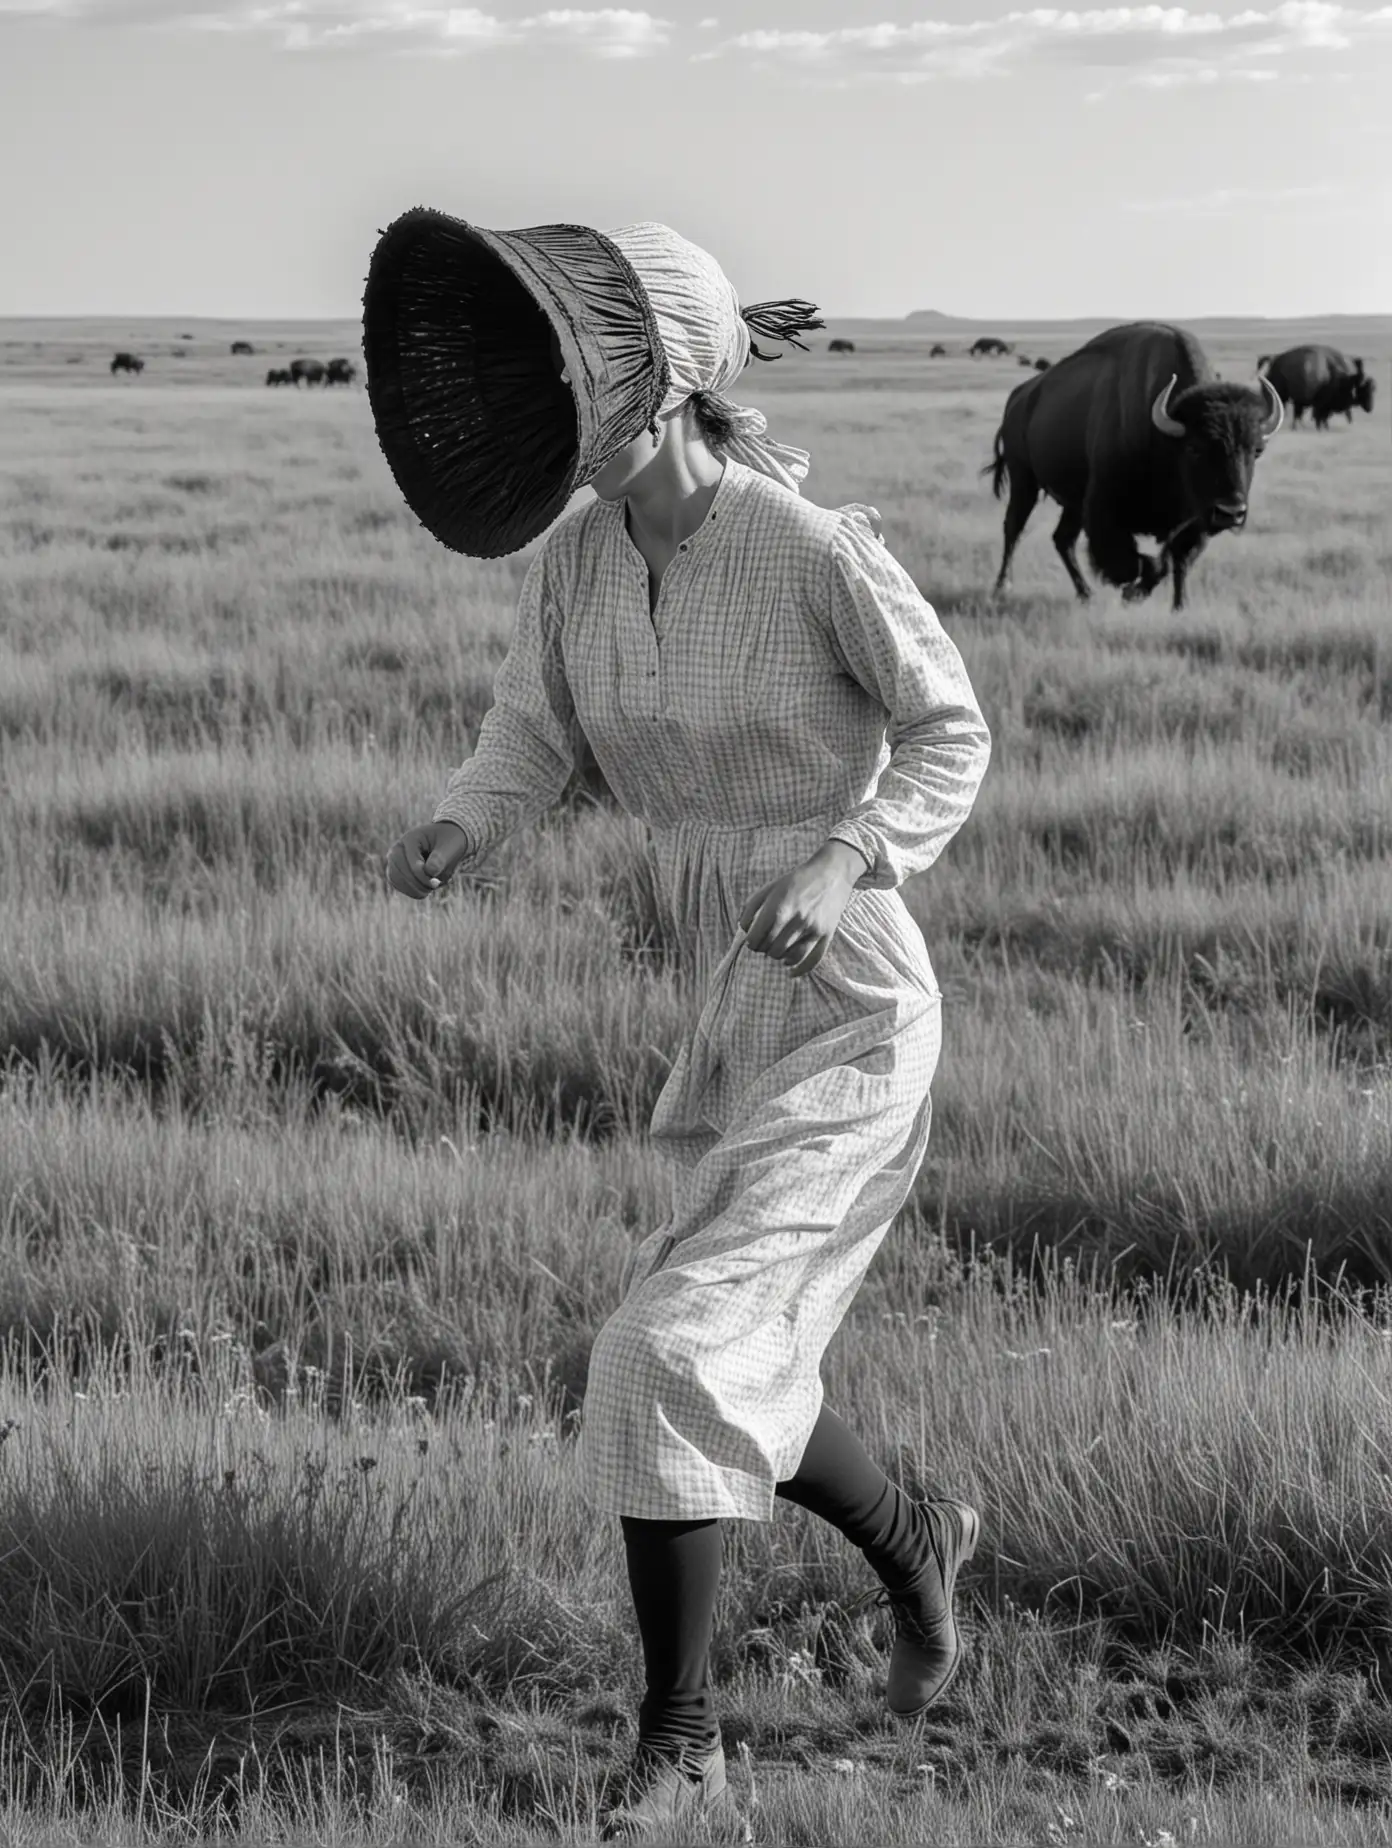 American Pioneer Woman Running through Prairie with Buffalo in Black and White